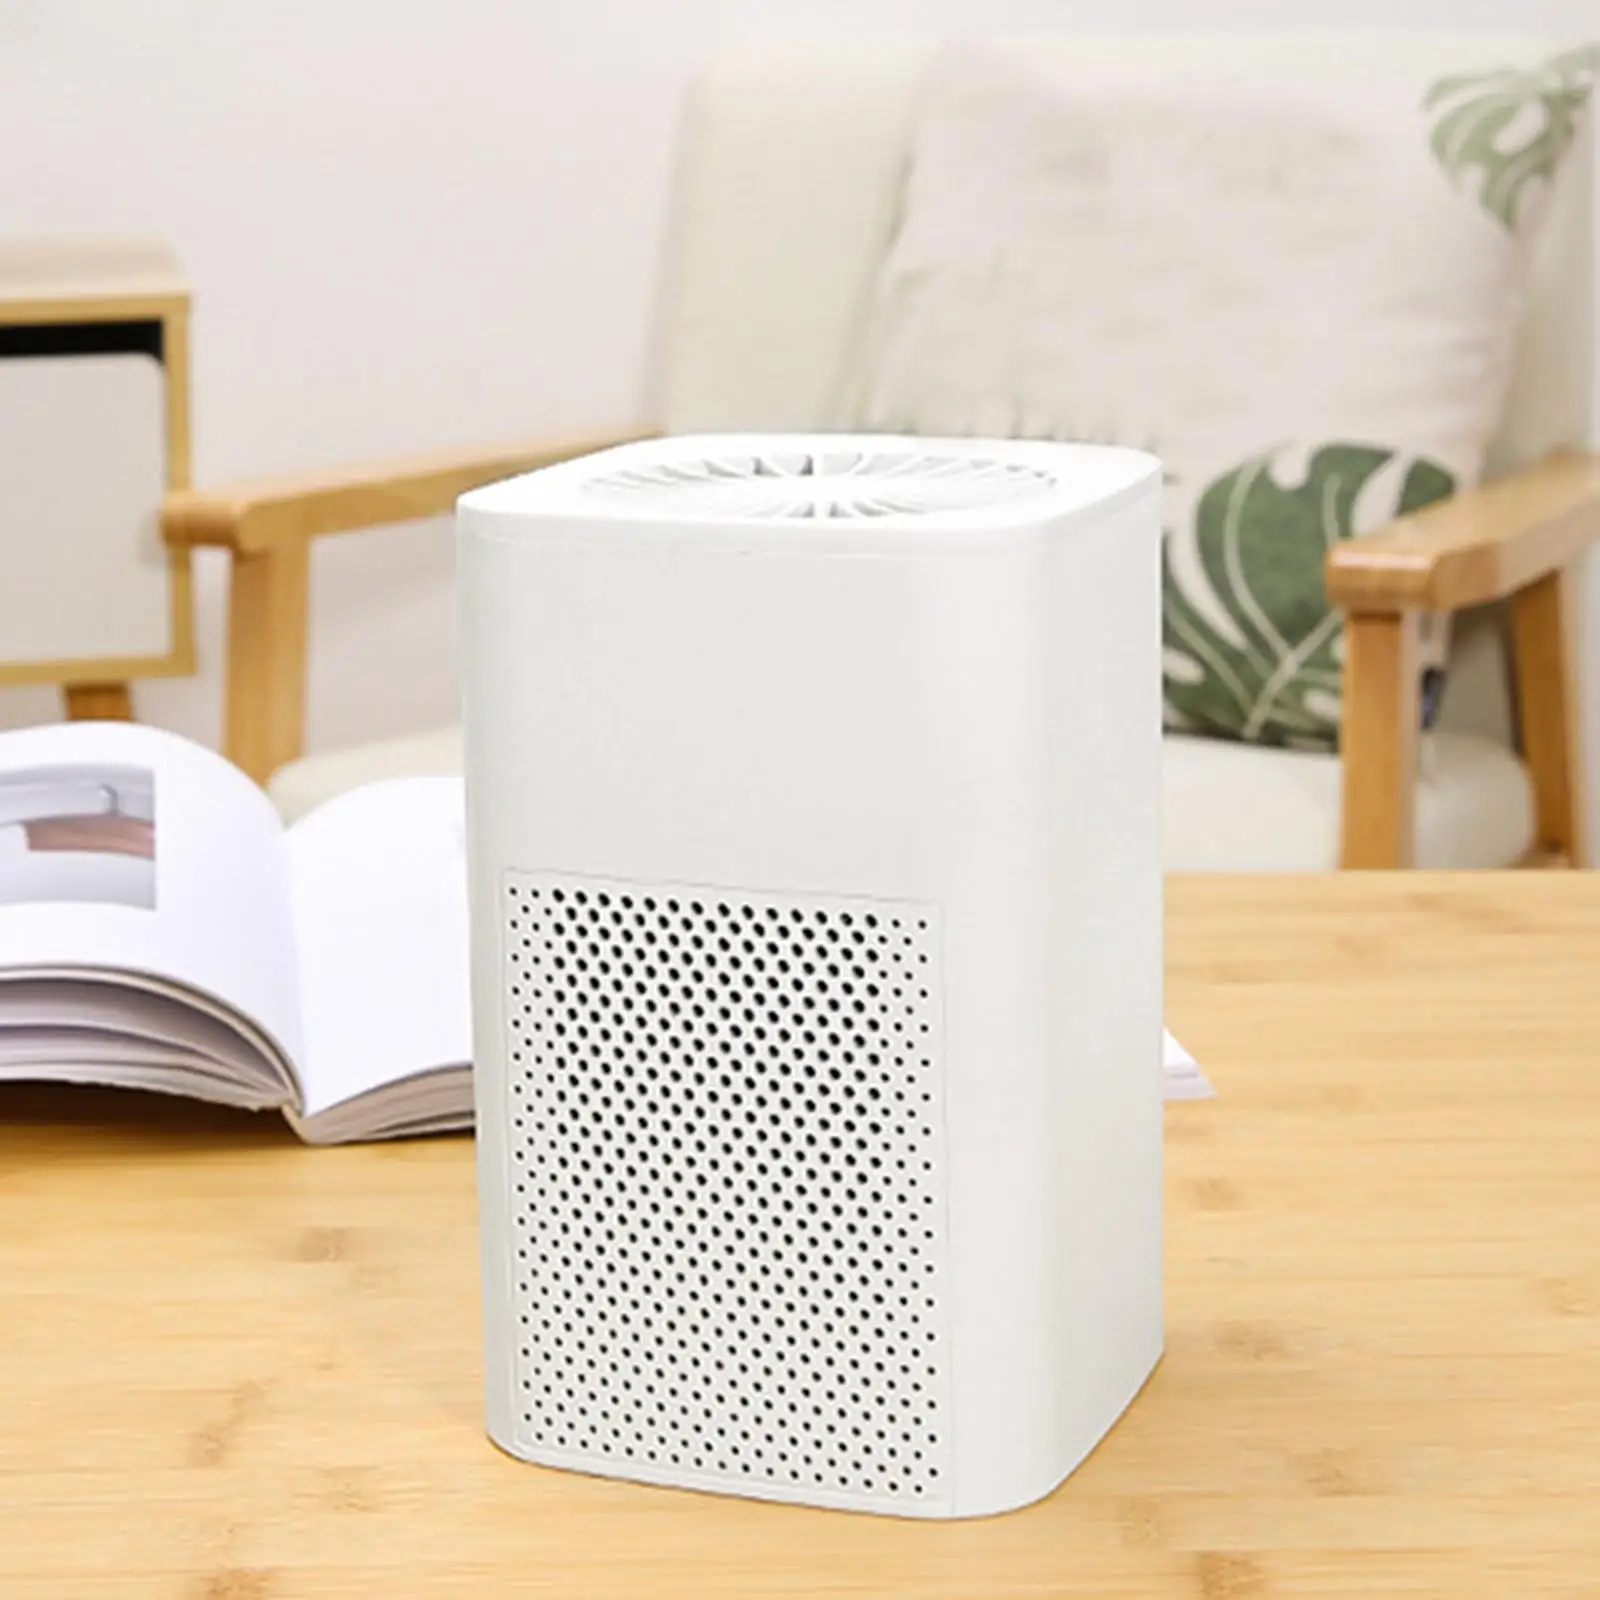 Portable Mini Air Purifier 2 Layer Activated Carbon 35dB USB Powered Home Air Cleaner Removes Dust Germs Particles Pet Allergies